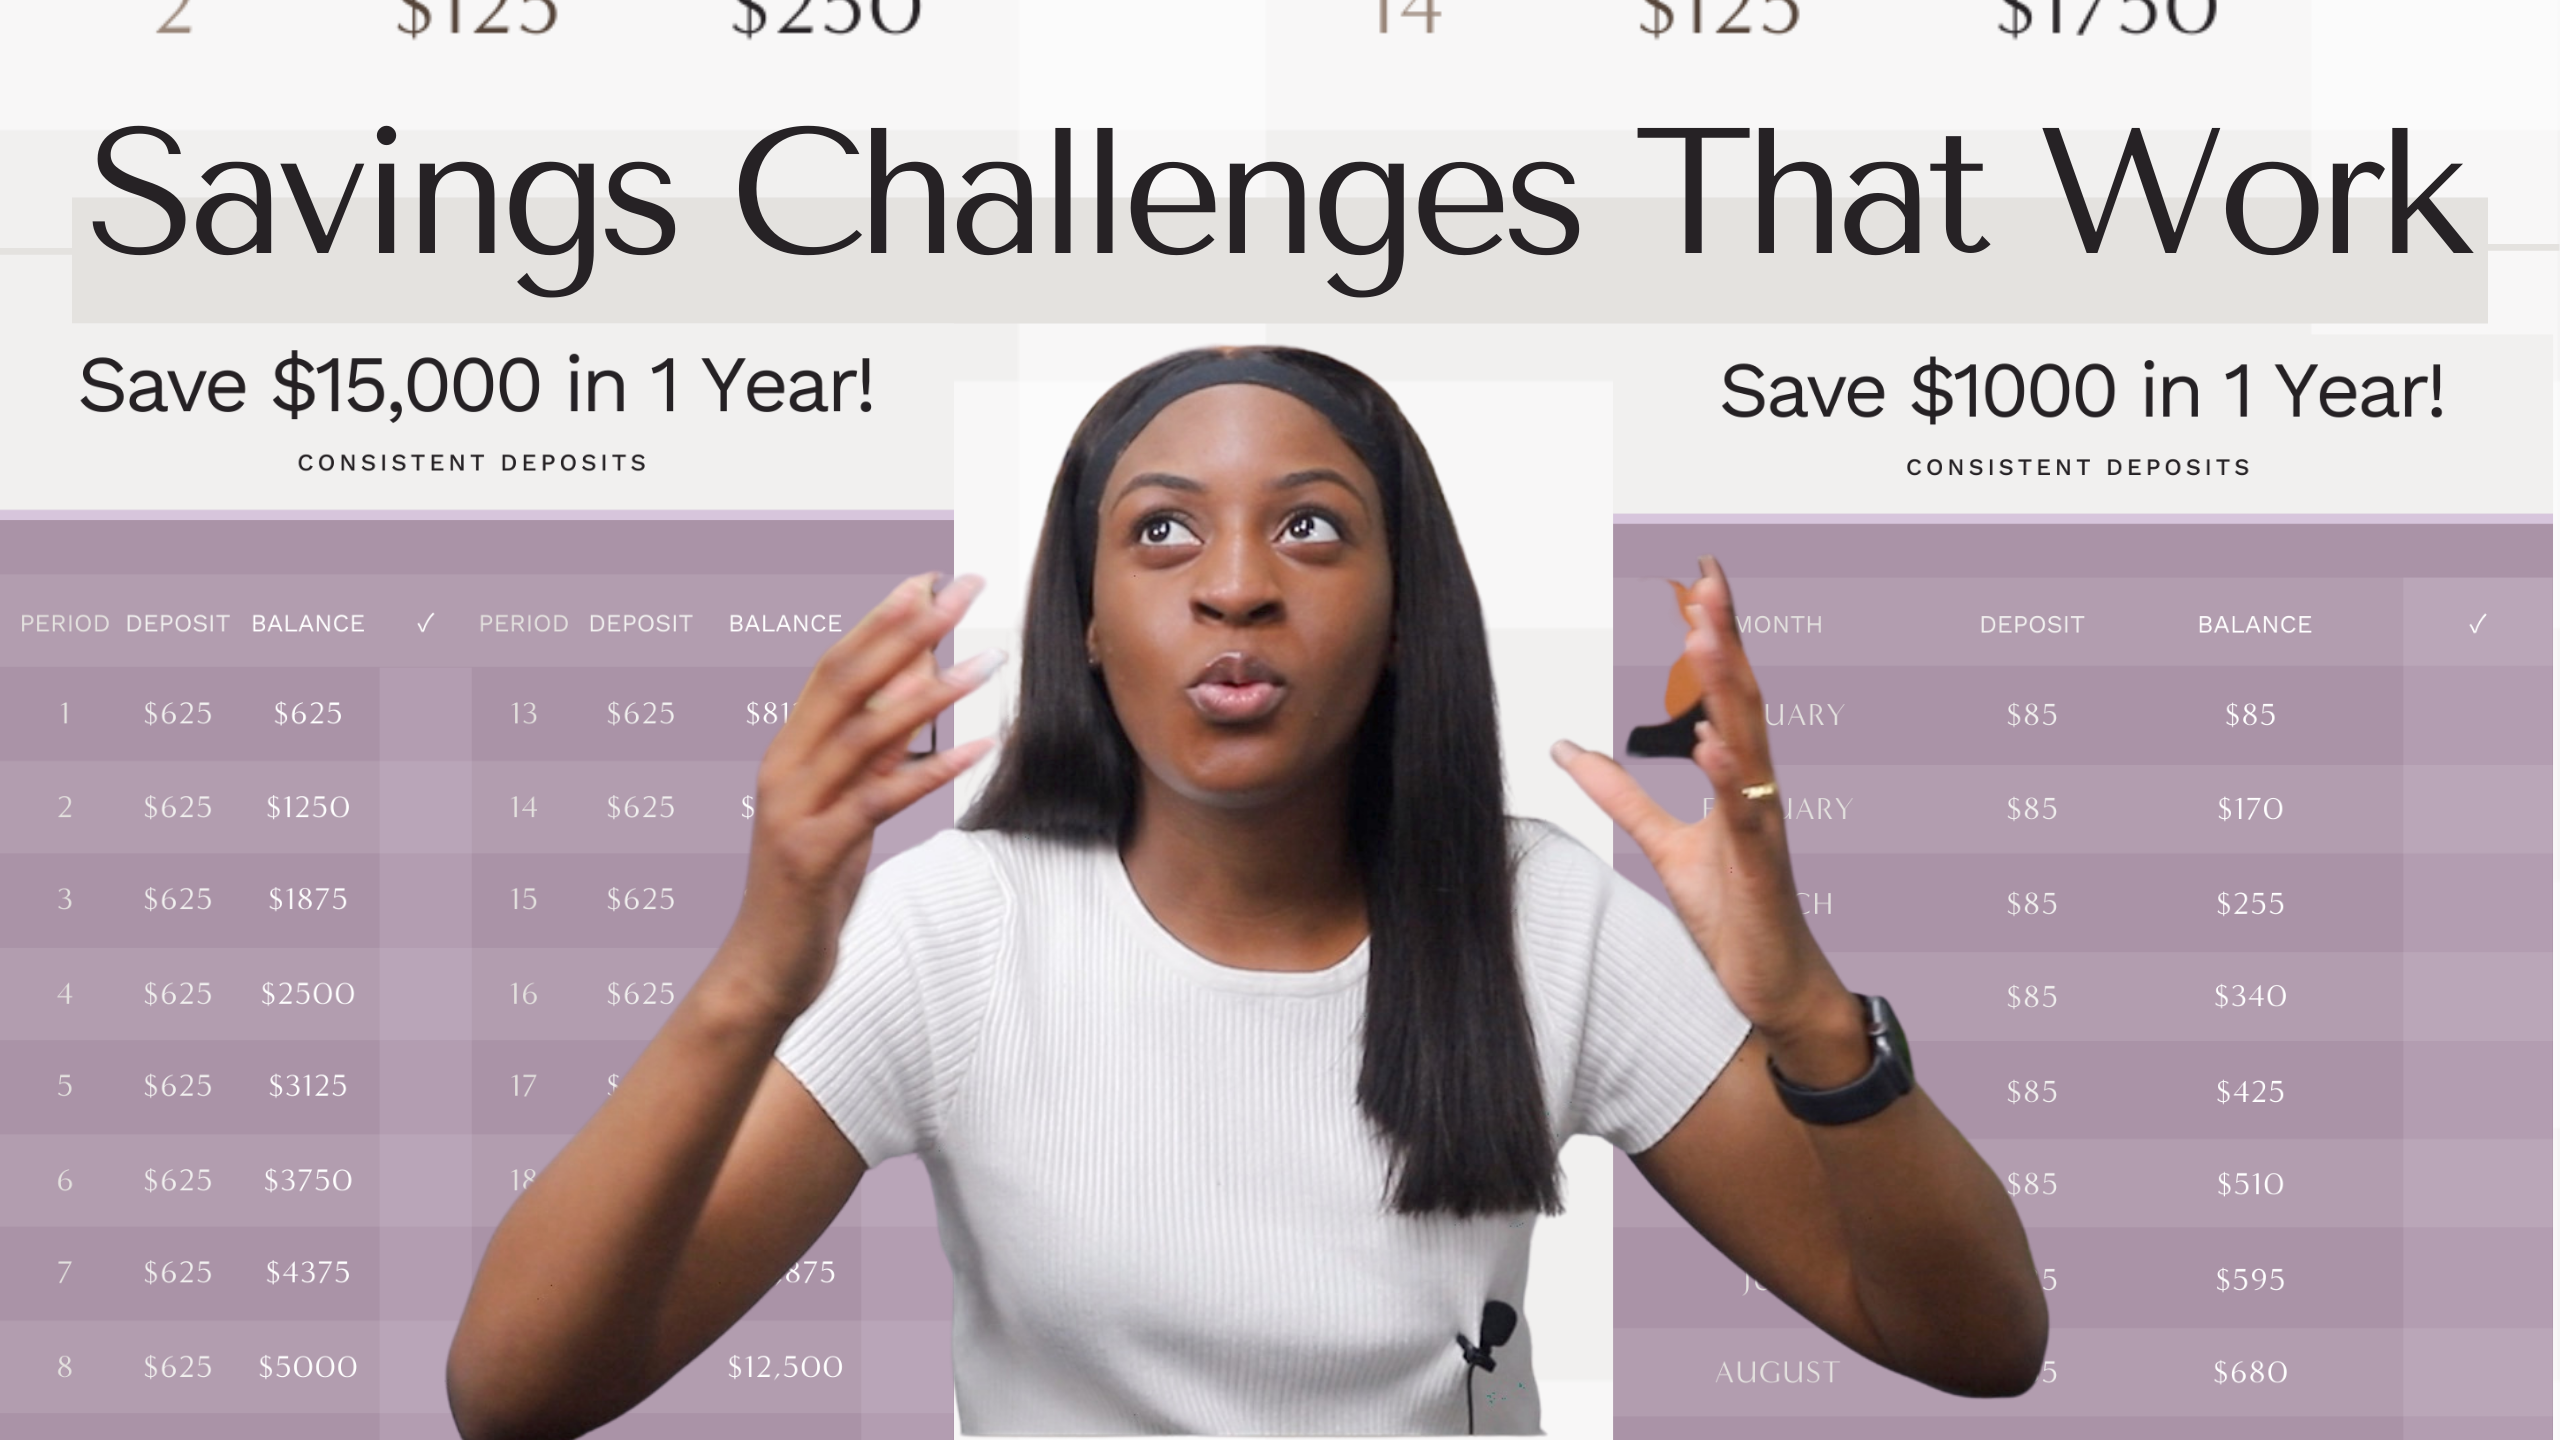 Savings challenges that work